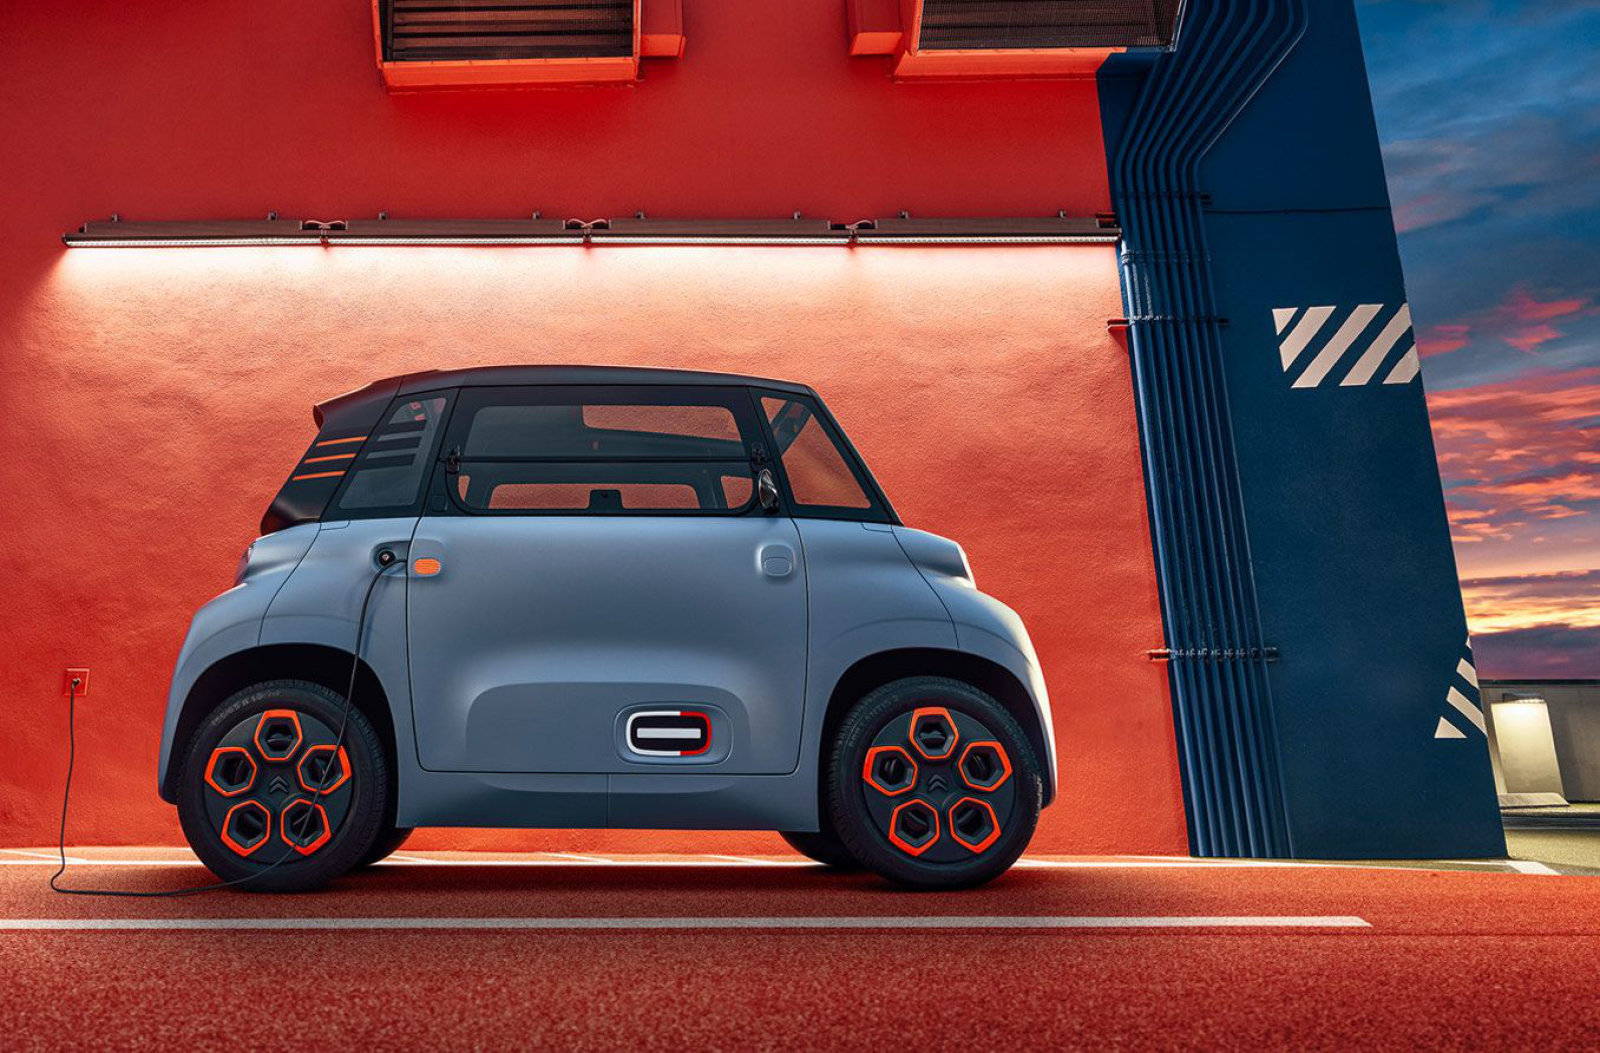 Citro&euml;n presented a tiny two-seater electric car Ami